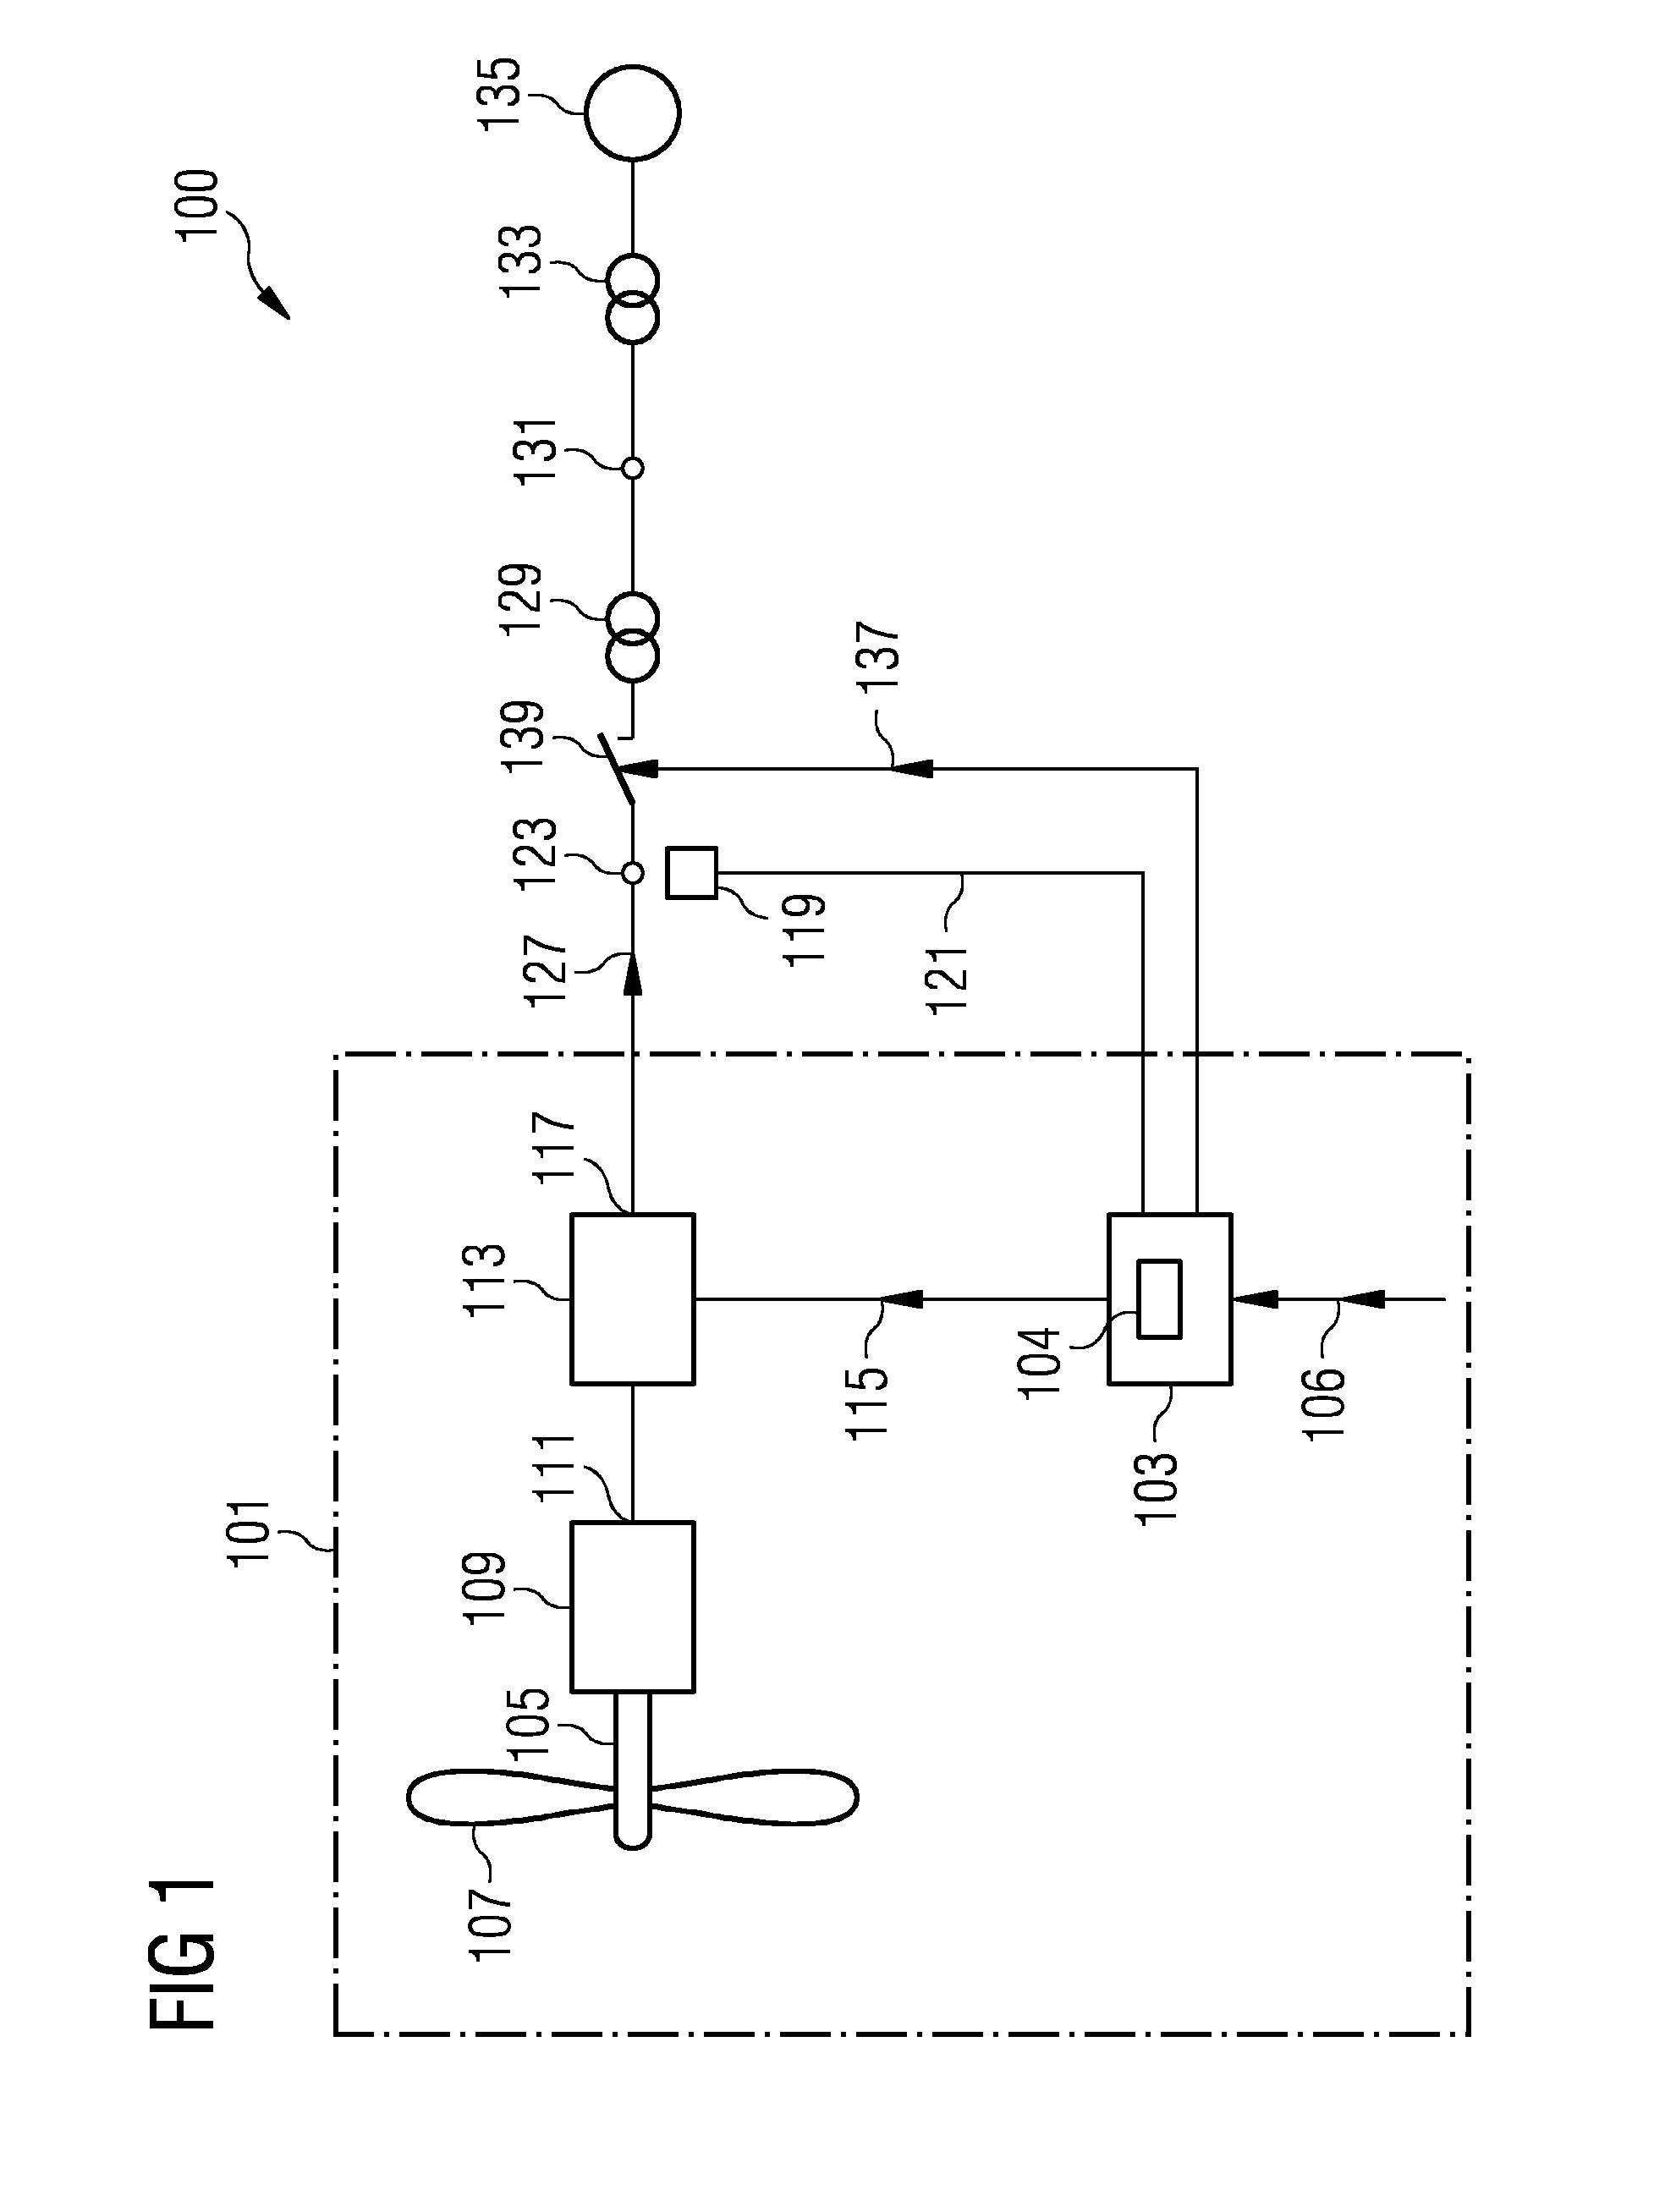 Method and arrangement for controlling a wind turbine using oscillation detection